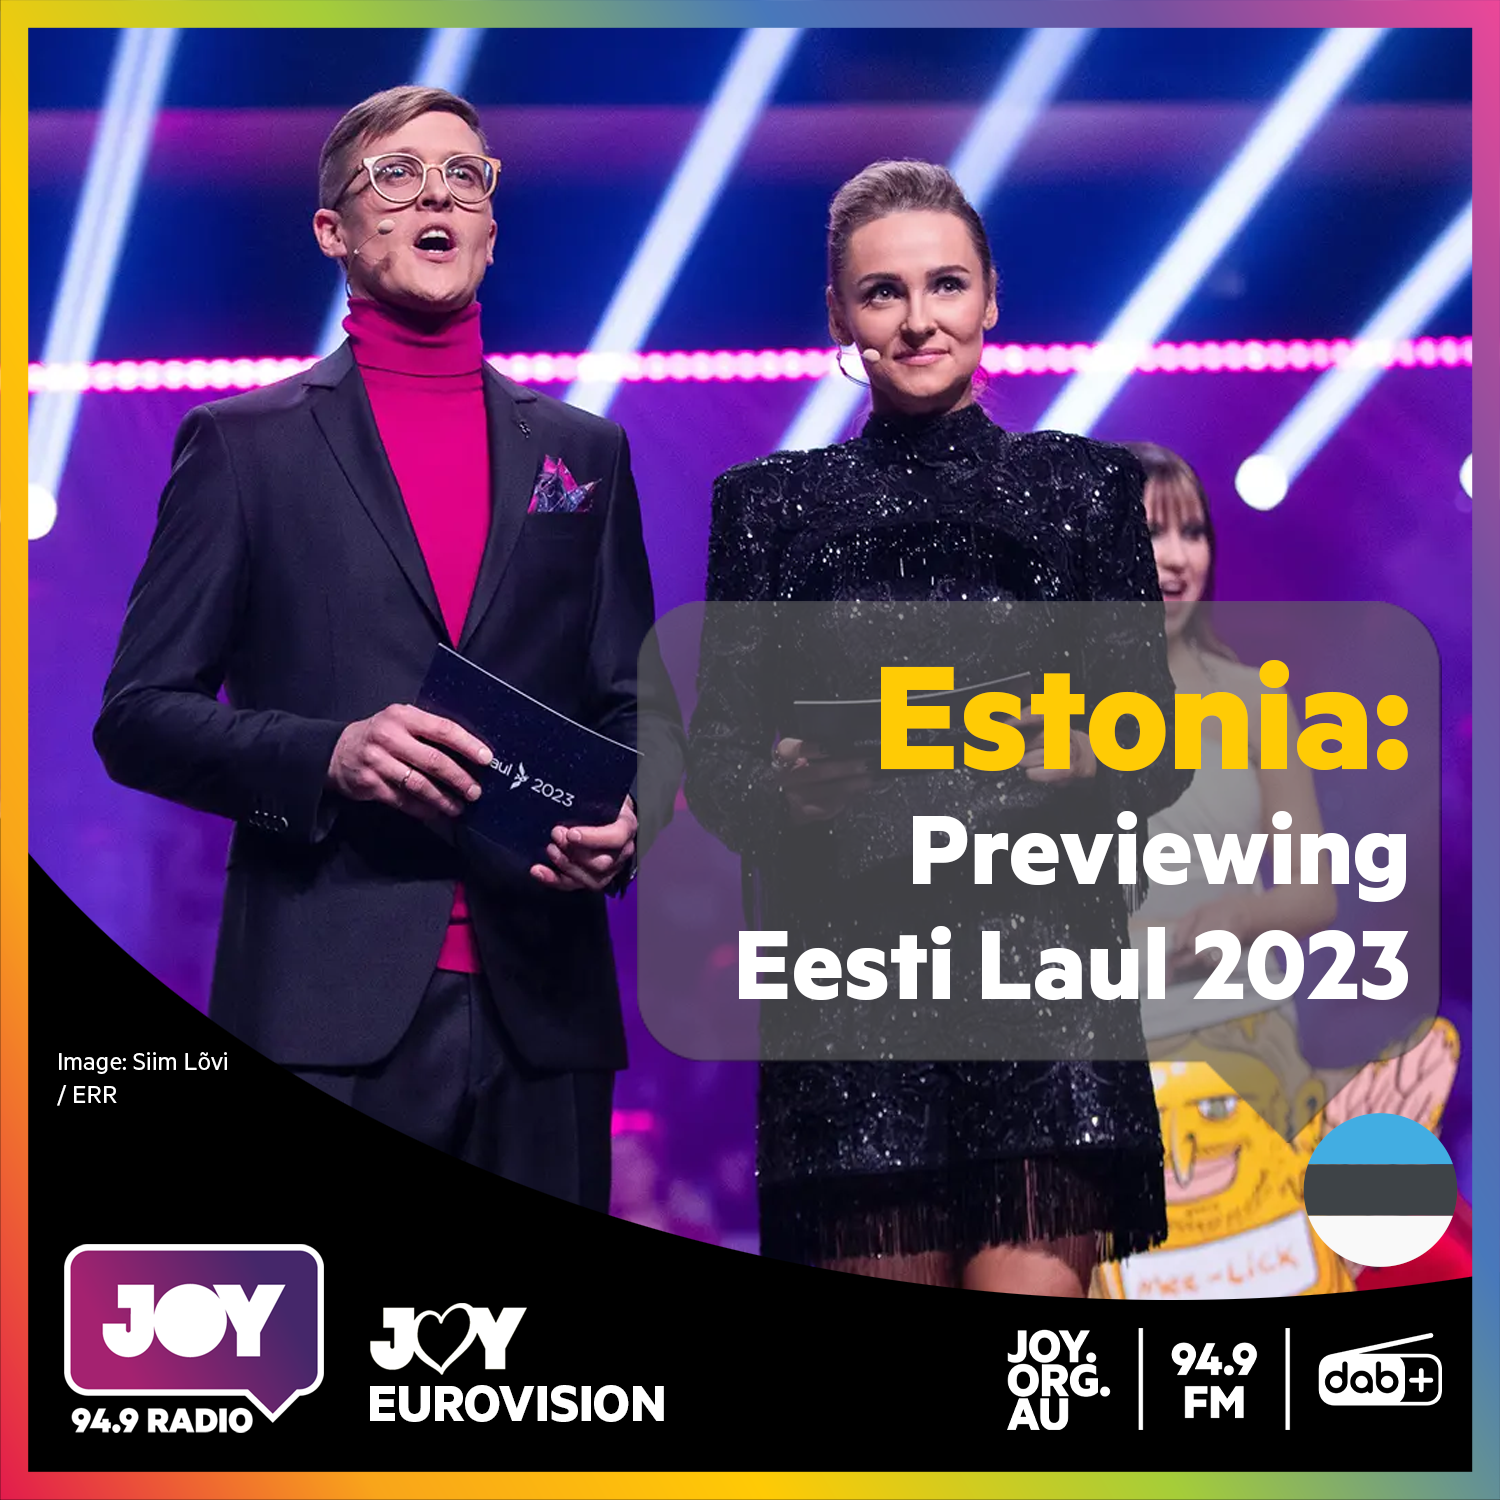 🇪🇪 Previewing Eesti Laul 2023: Estonia wants their song